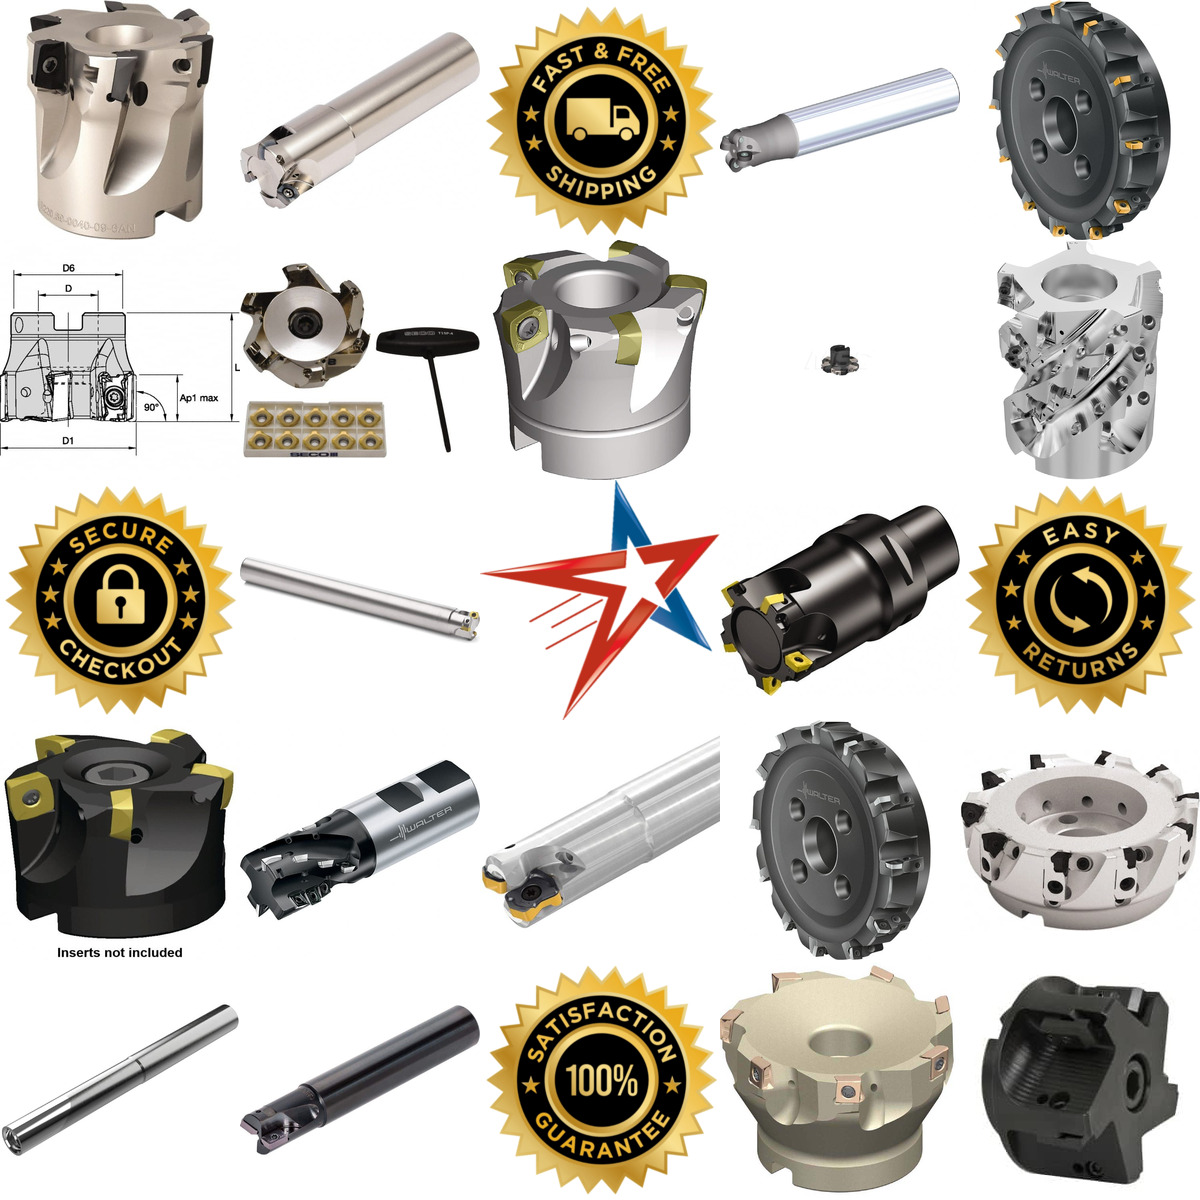 A selection of Indexable Milling products on GoVets